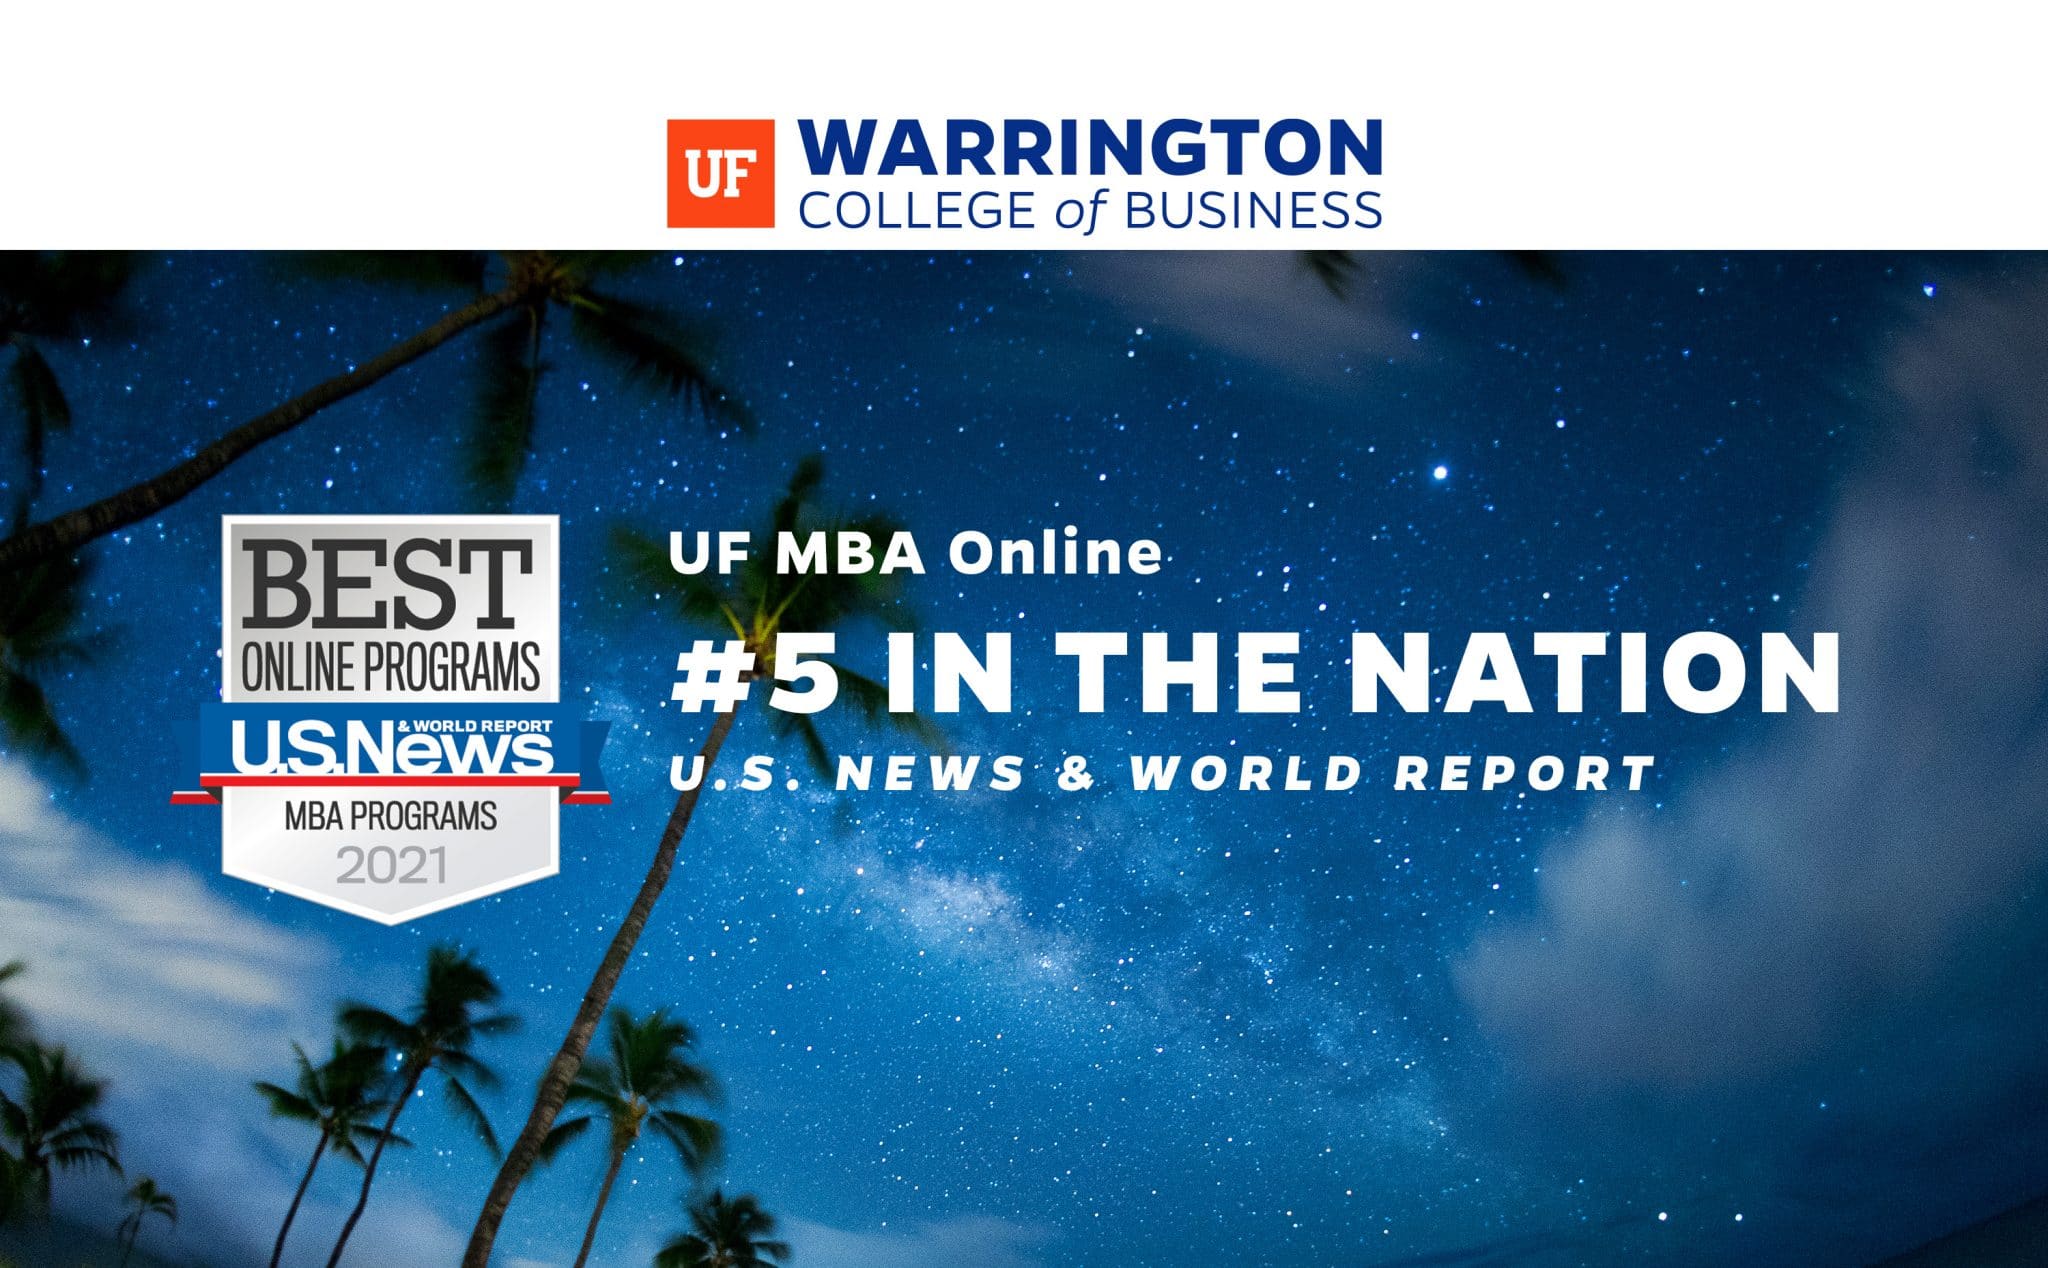 UF MBA continues to command top online MBA programs on US News & Report's ranking |